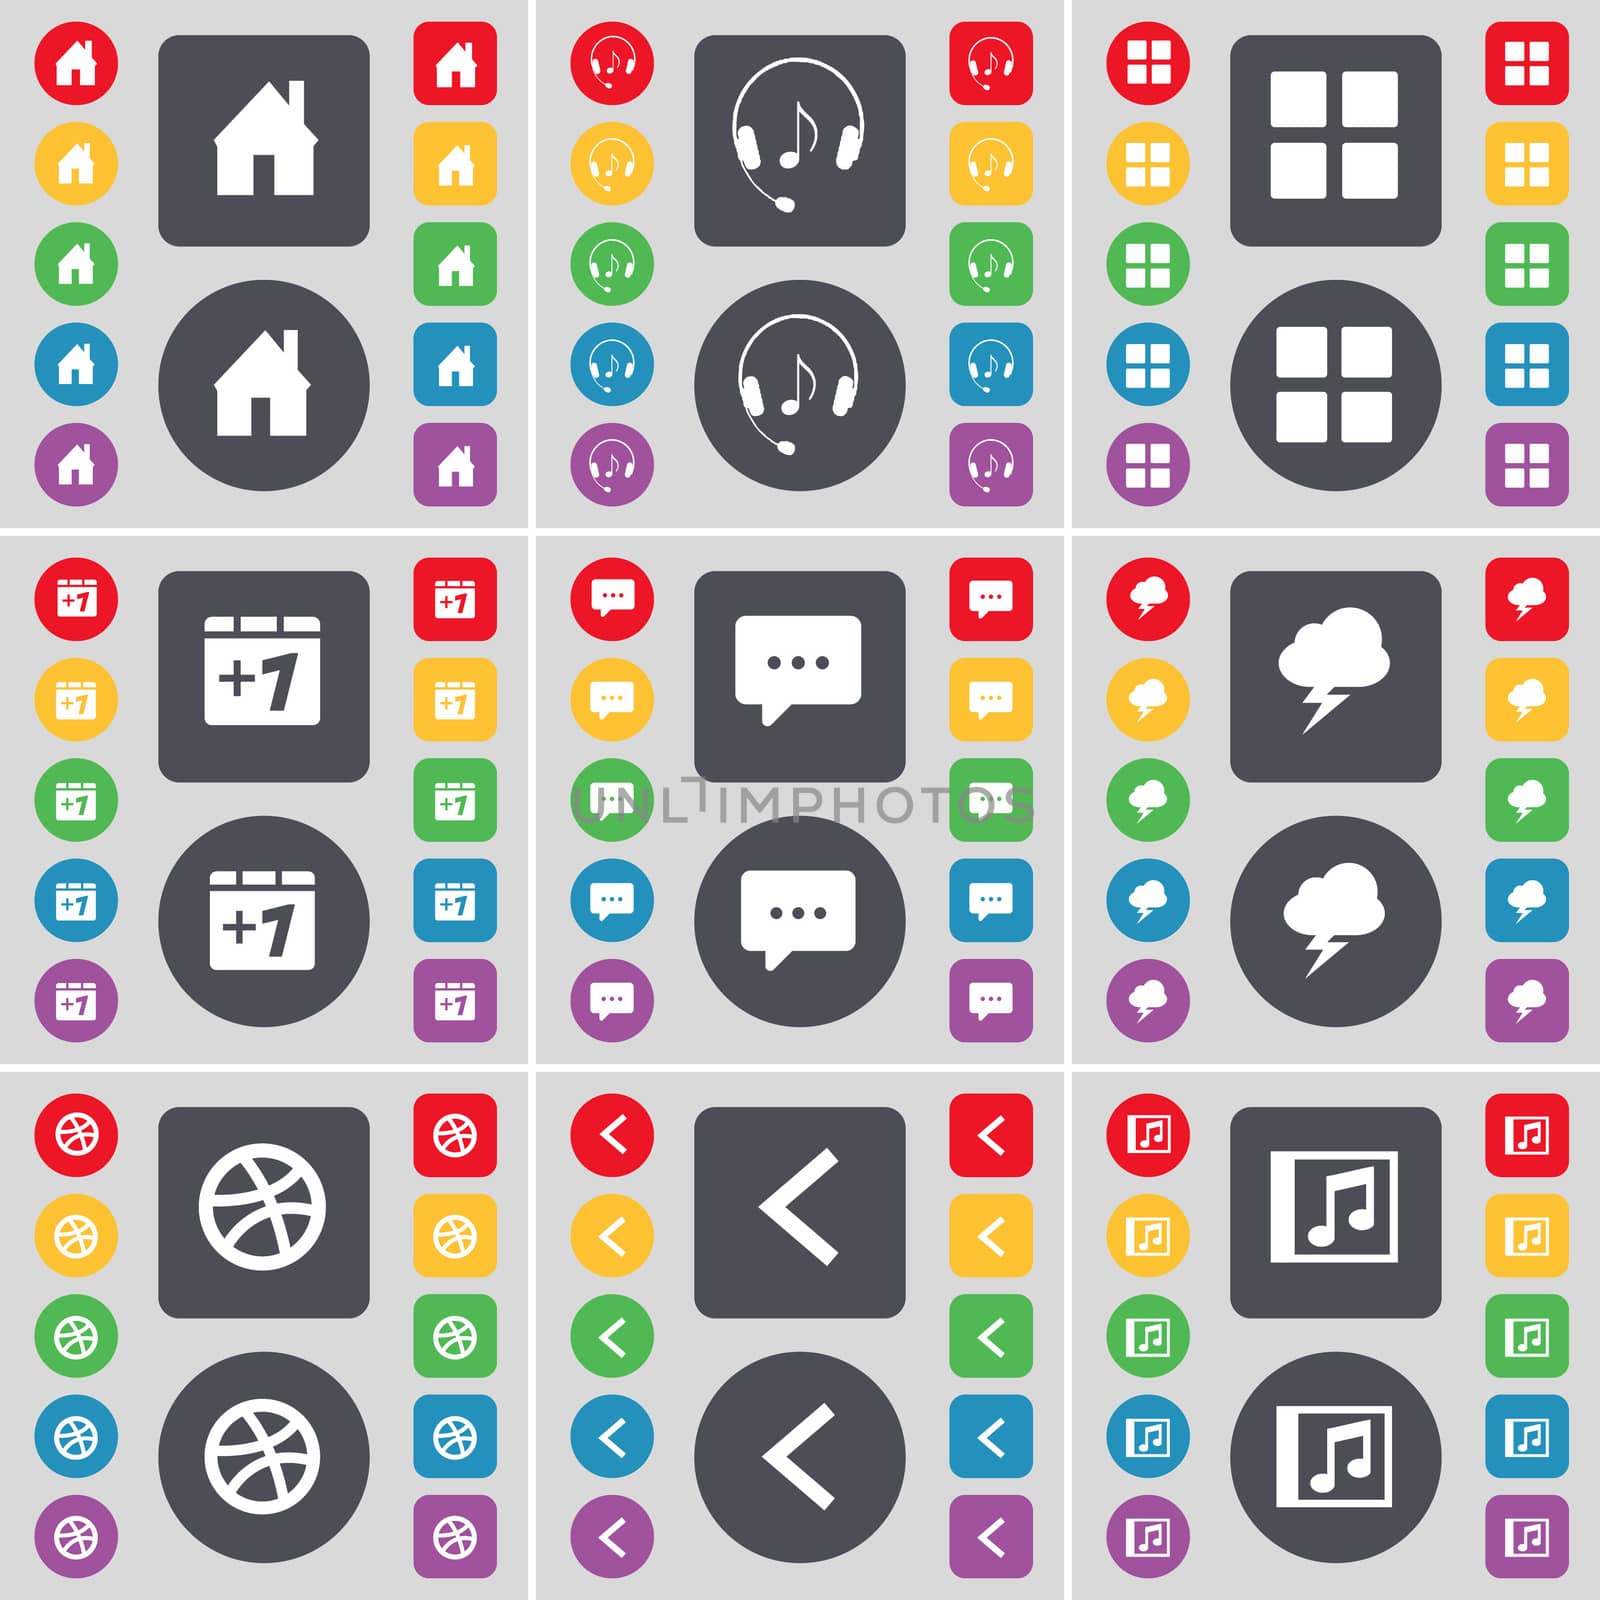 House, Headphones, Apps, Plus one, Chat bubble, Lightning, Ball, Arrow left, Music window icon symbol. A large set of flat, colored buttons for your design. illustration